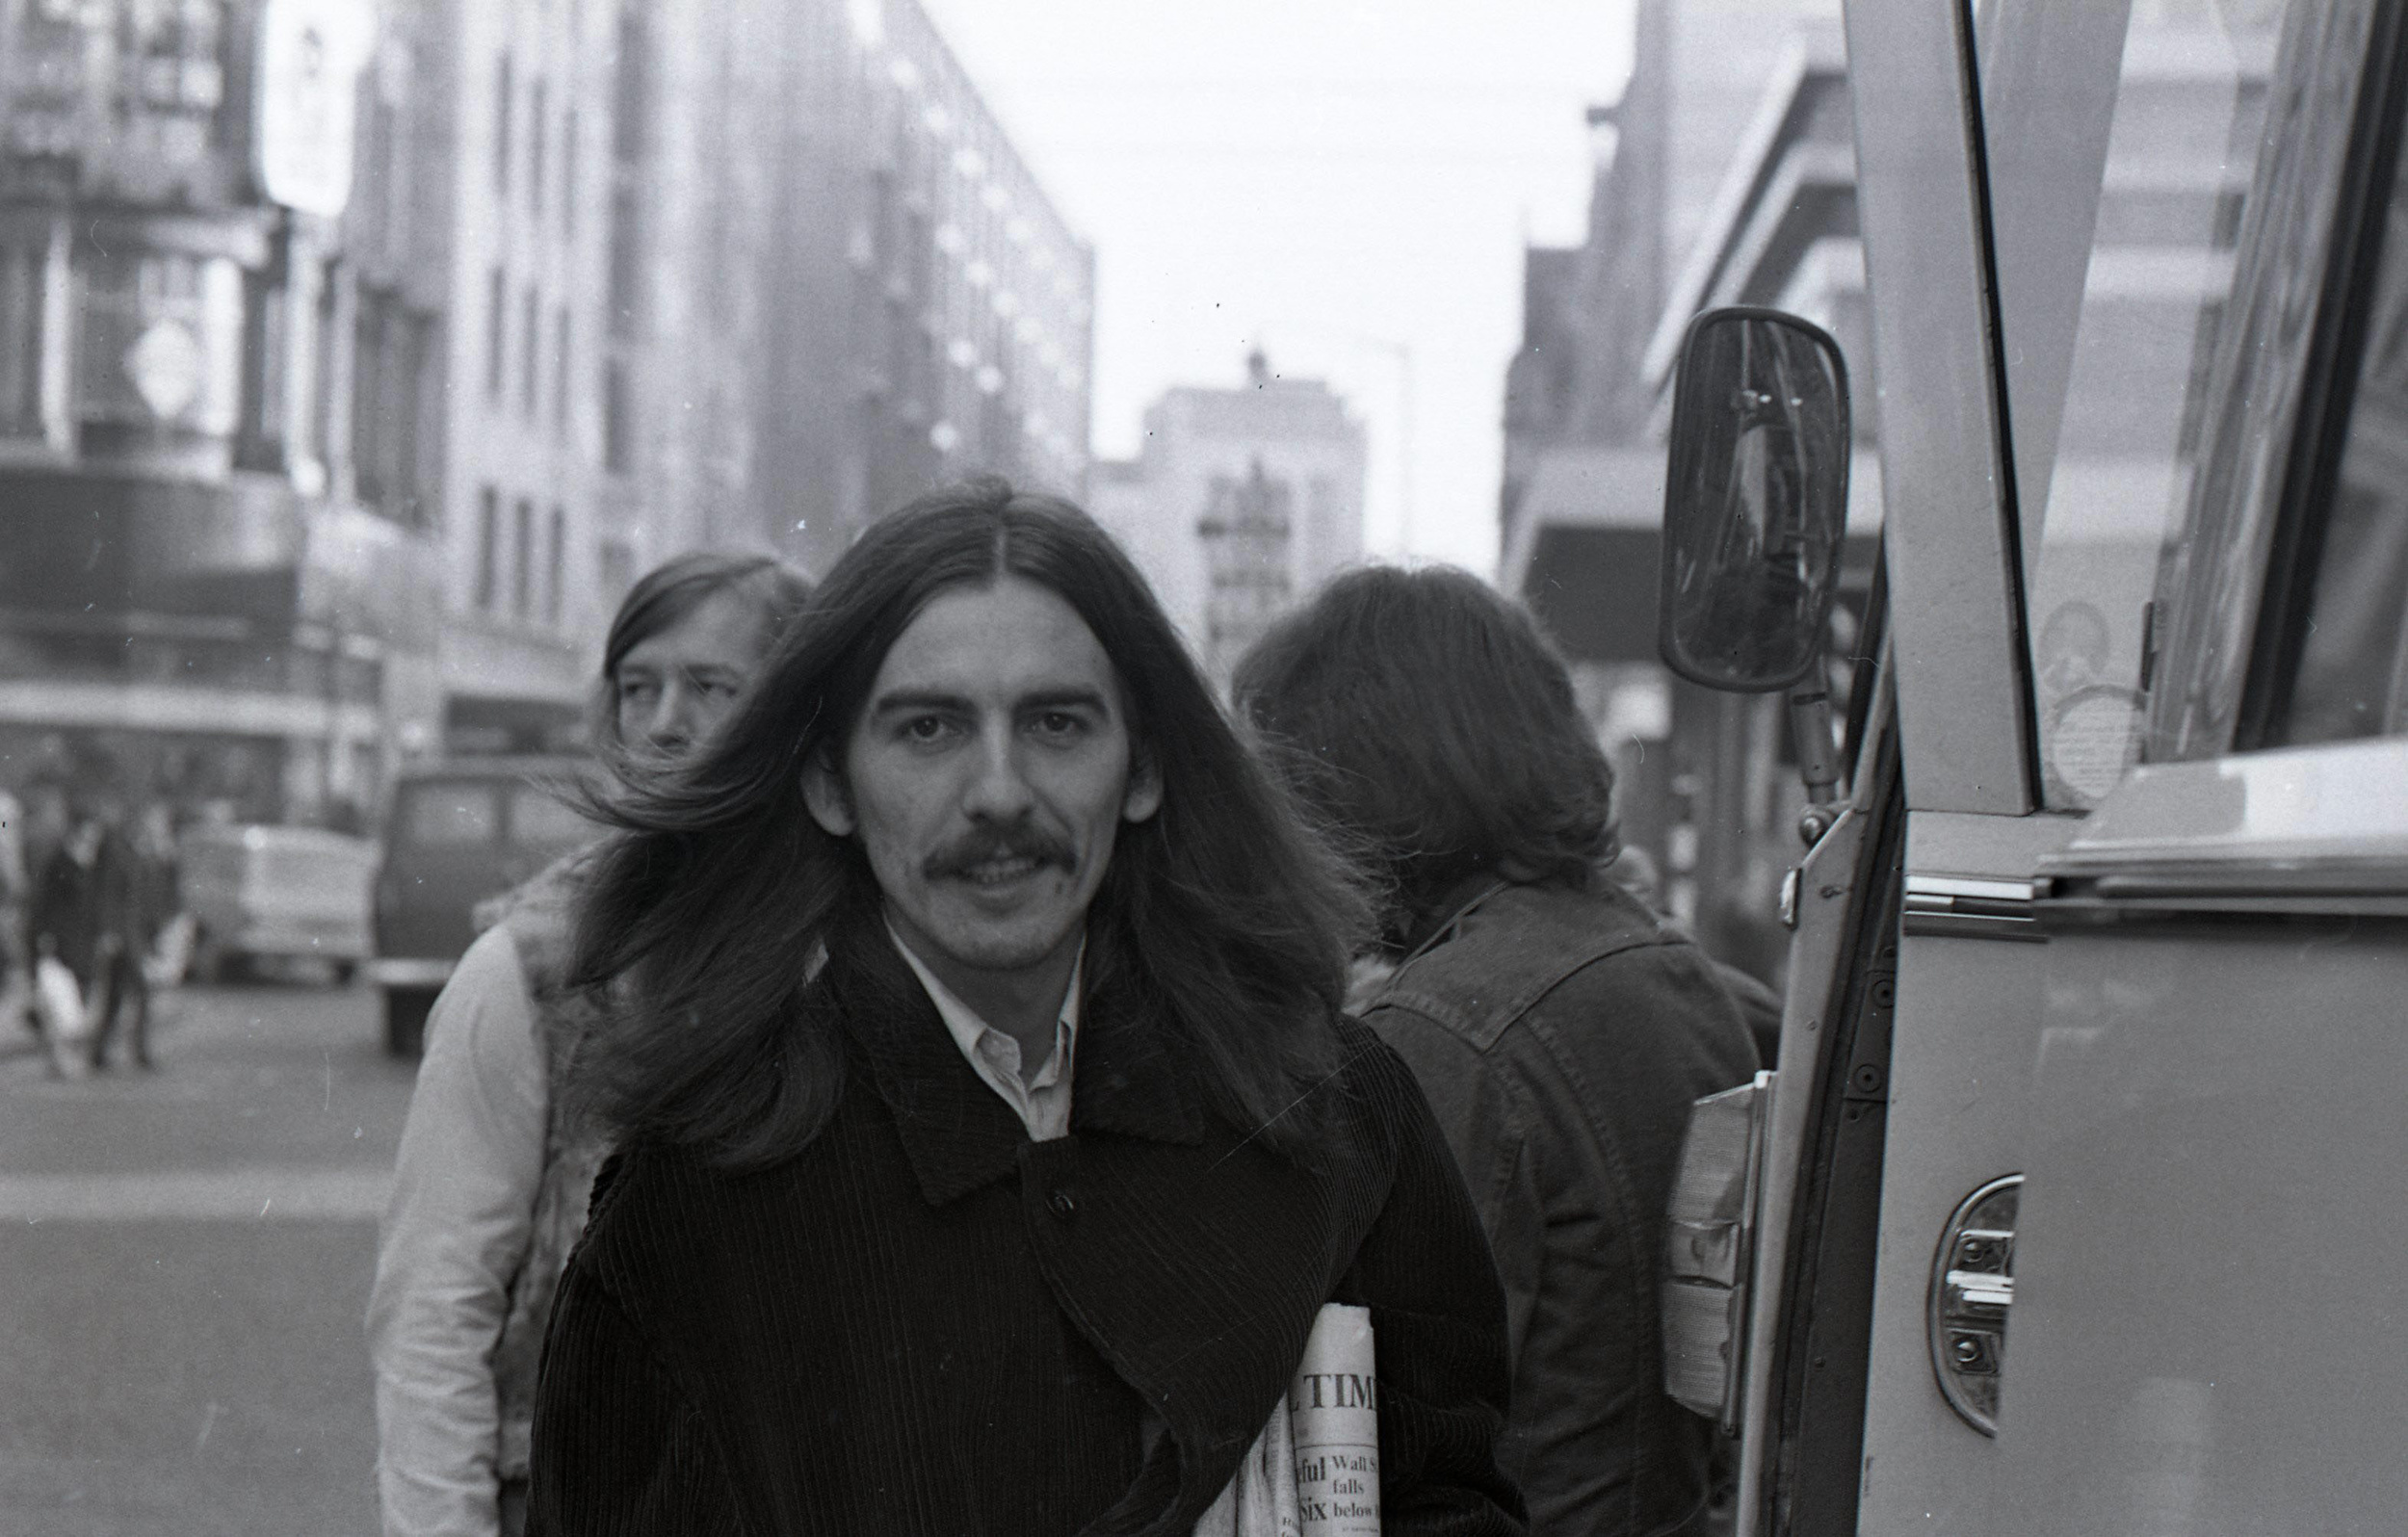 <p>George Harrison finally realized his songwriting potential with this blisteringly emotional track on “The White Album," which features an extended guitar solo from Eric Clapton that ranks among the esteemed musician’s finest work. As The Beatles began to grow further apart, Harrison turned inward; while his band mates dabbled in Indian spiritualism, Harrison firmly embraced it and poured all of his hopes and frustrations into this song. It was a stirring preview of what he’d accomplish with “All Things Must Pass."</p><p>You may also like: <a href='https://www.yardbarker.com/entertainment/articles/the_best_and_worst_tv_shows_about_outer_space_012524/s1__32132597'>The best and worst TV shows about outer space</a></p>